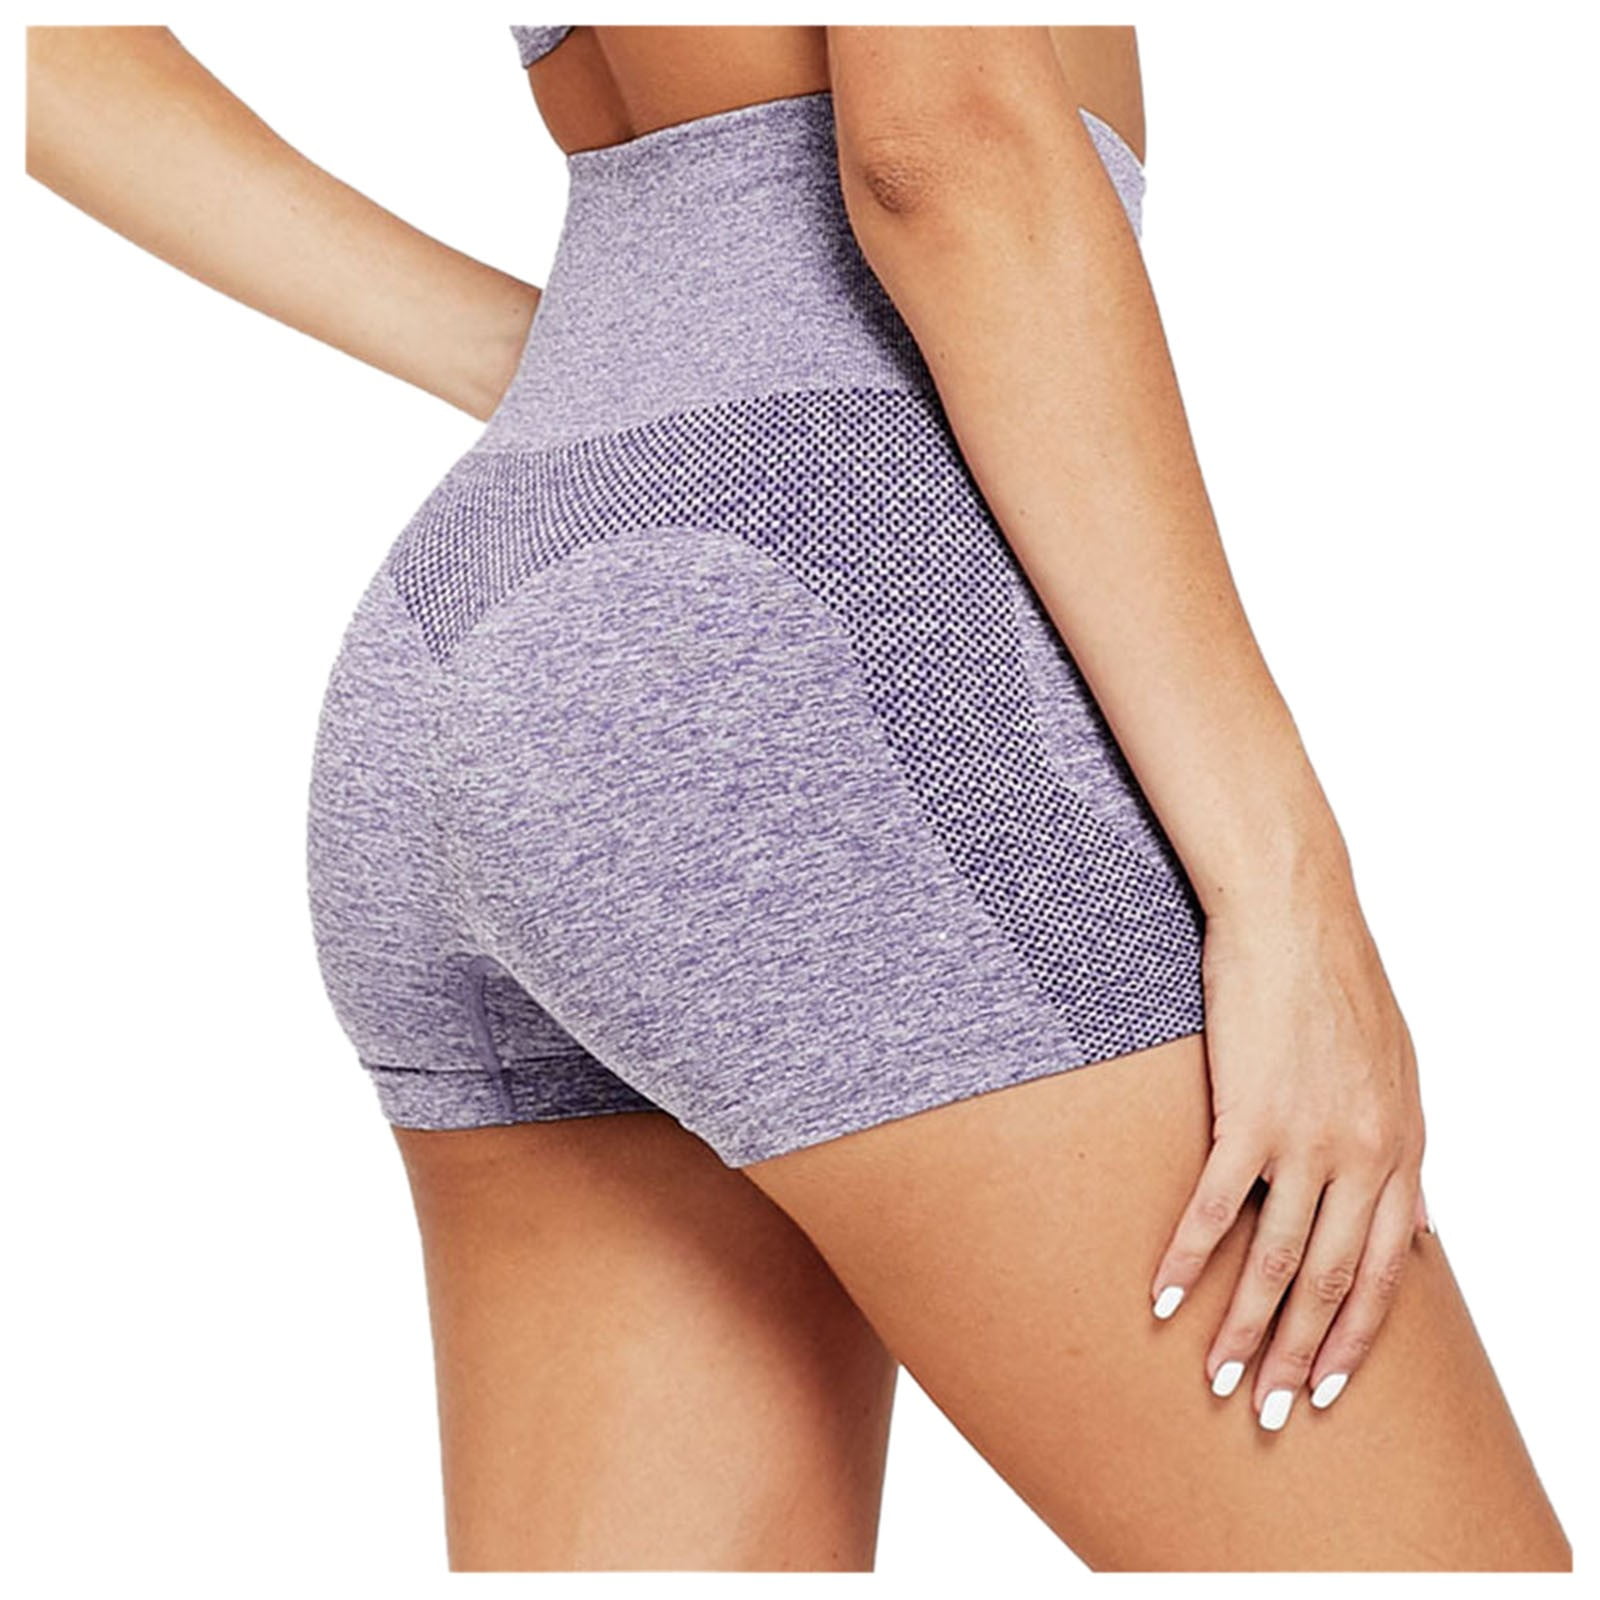 Details about   Women Yoga Shorts Fitness Seamless Athletic Exercise Gym Compression Sportswear 